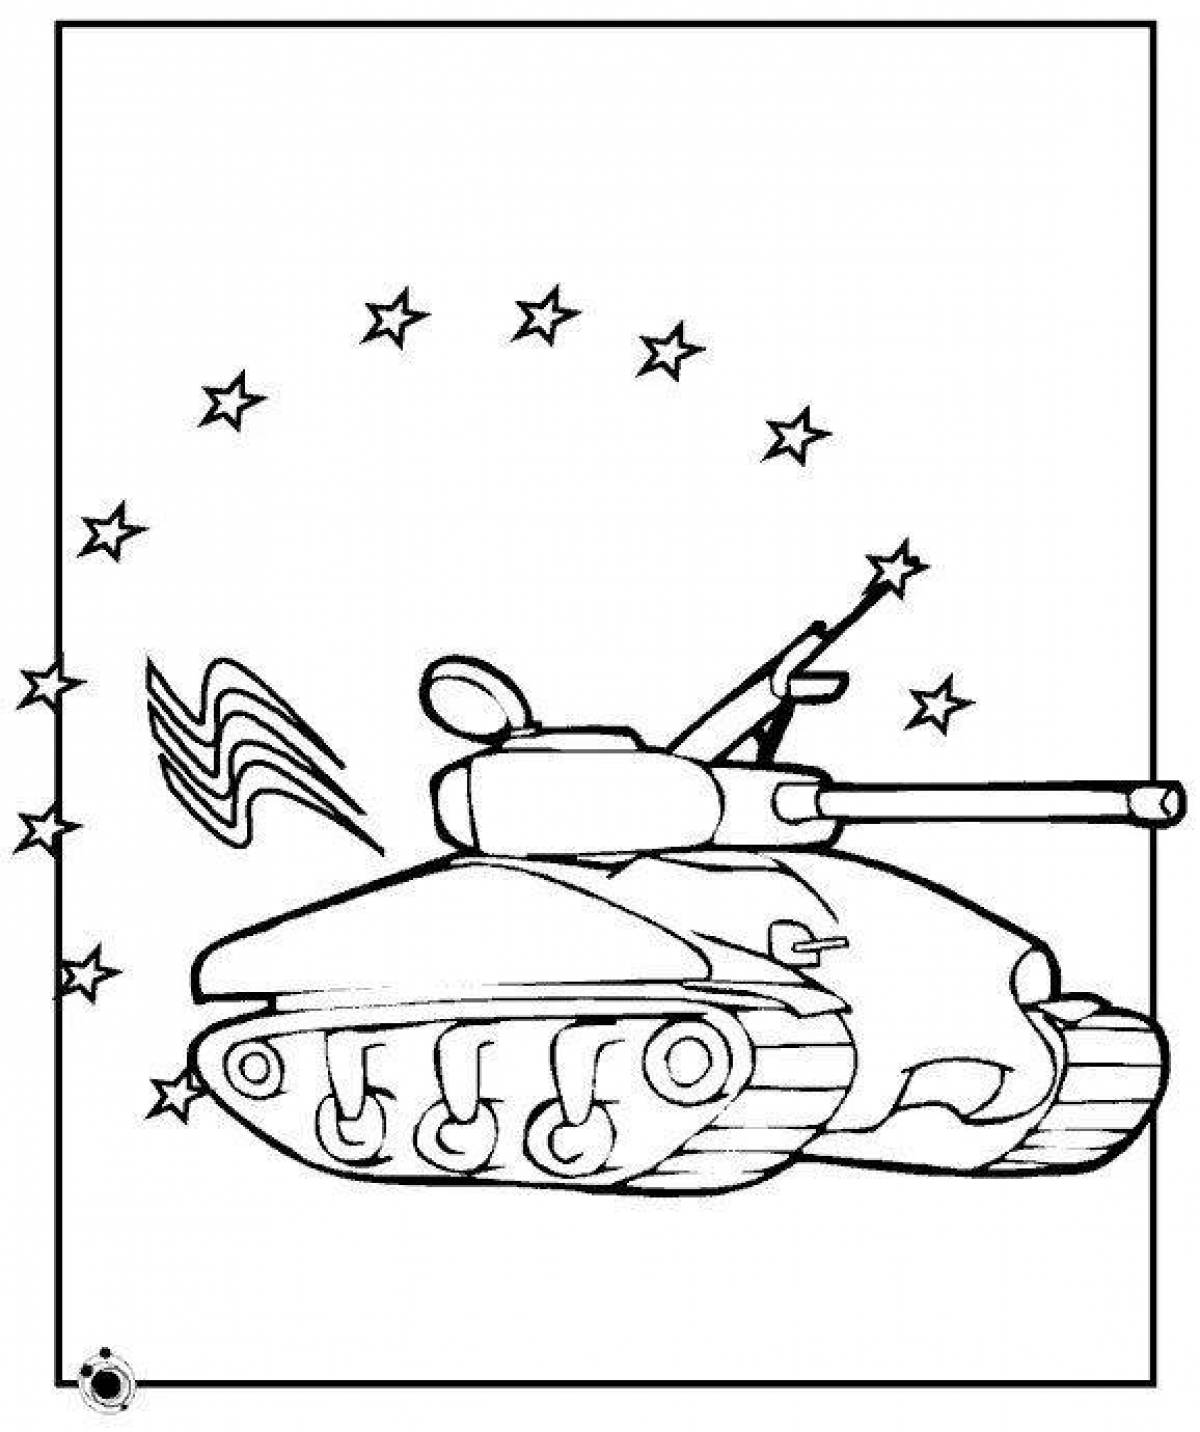 Creative soldier and tank coloring book